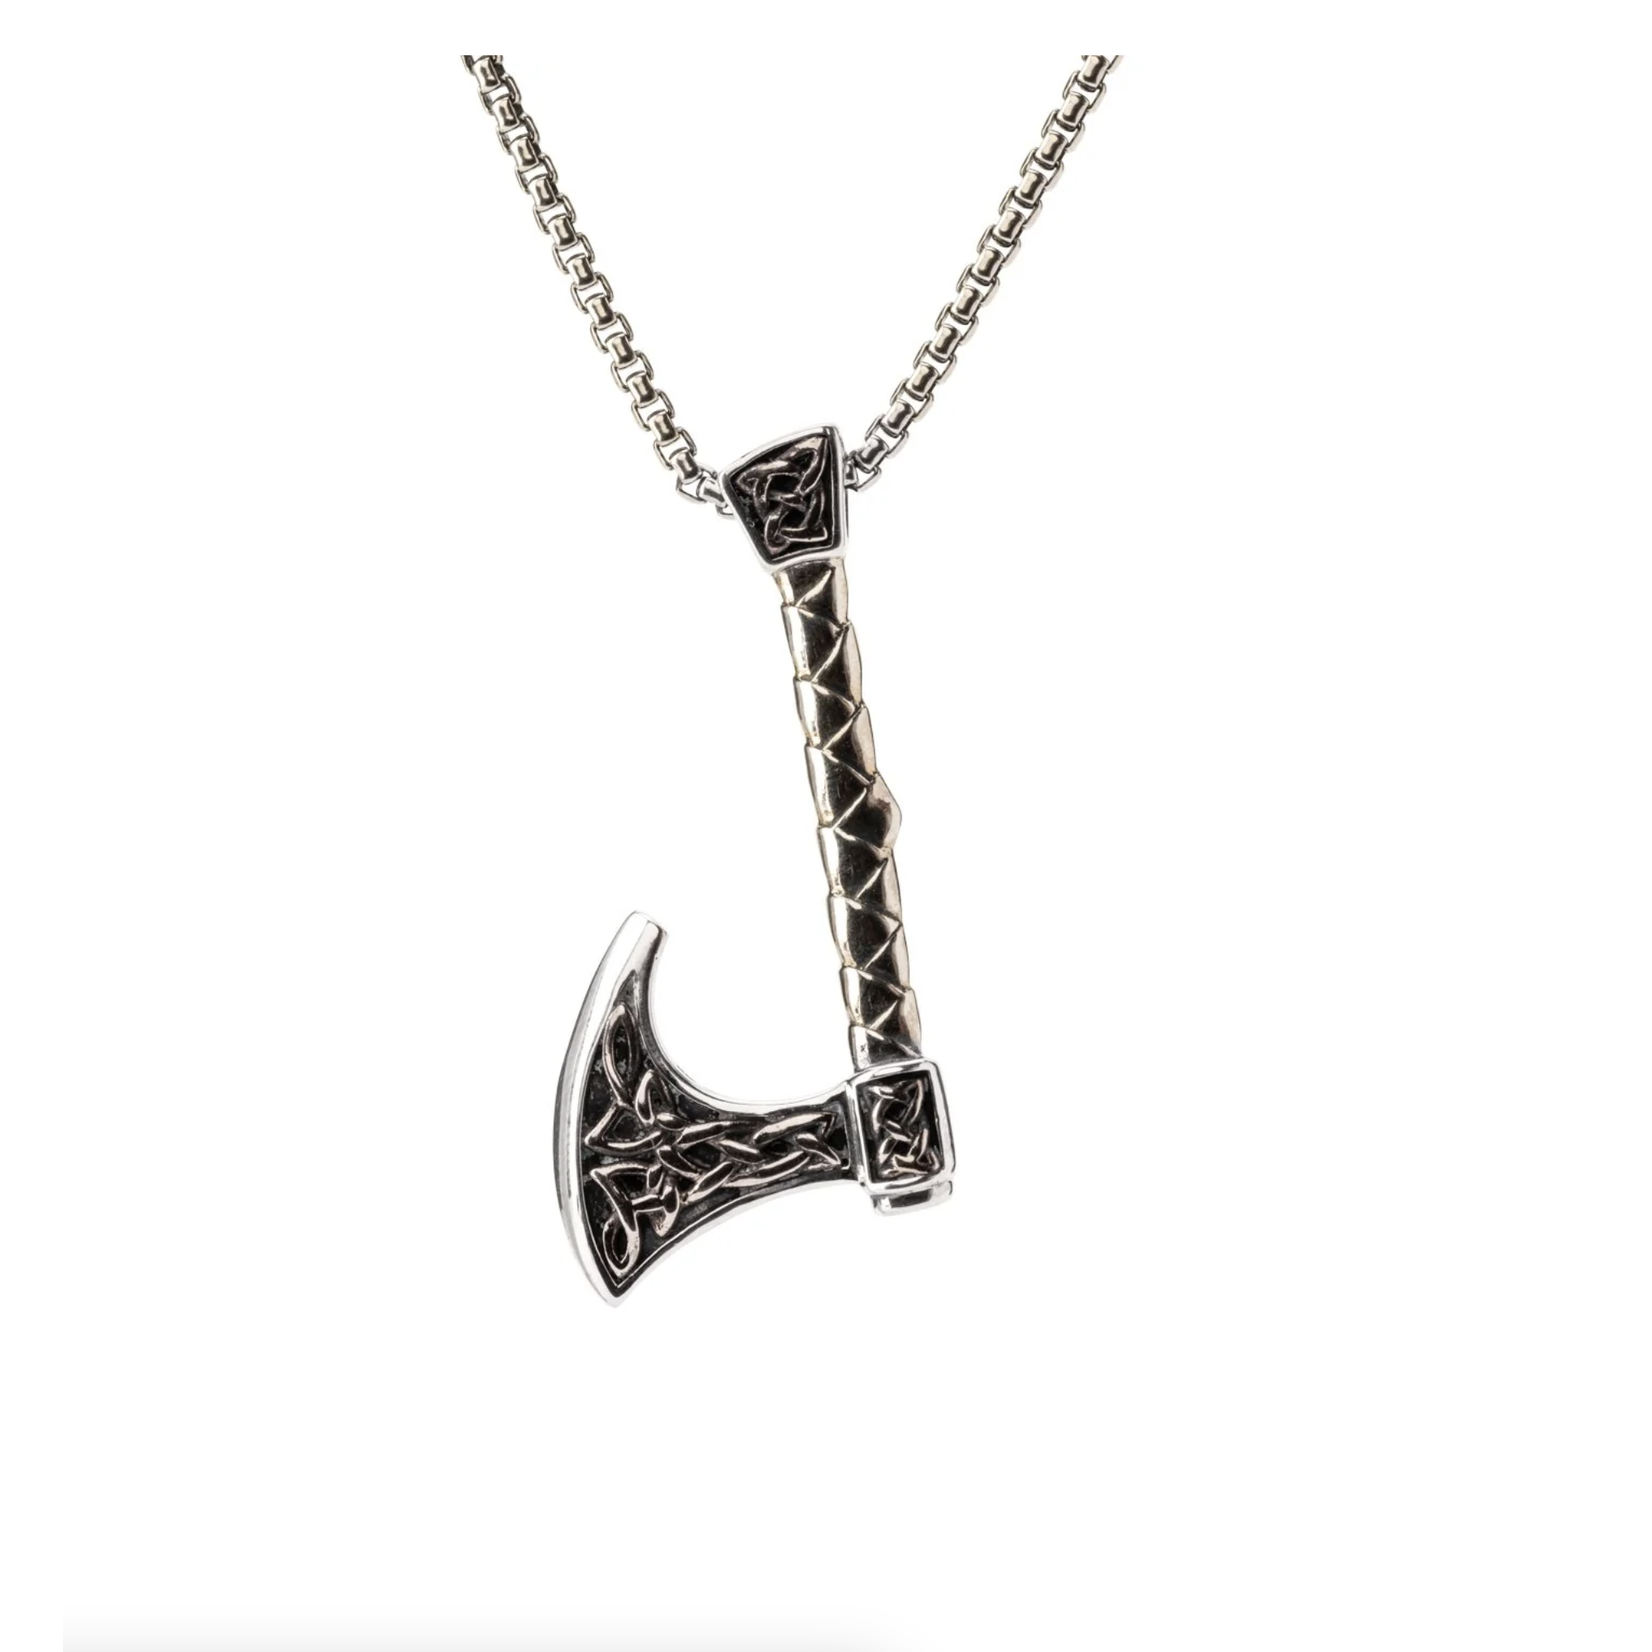 Keith Jack Silver and Bronze Viking Warrior Axe Necklace